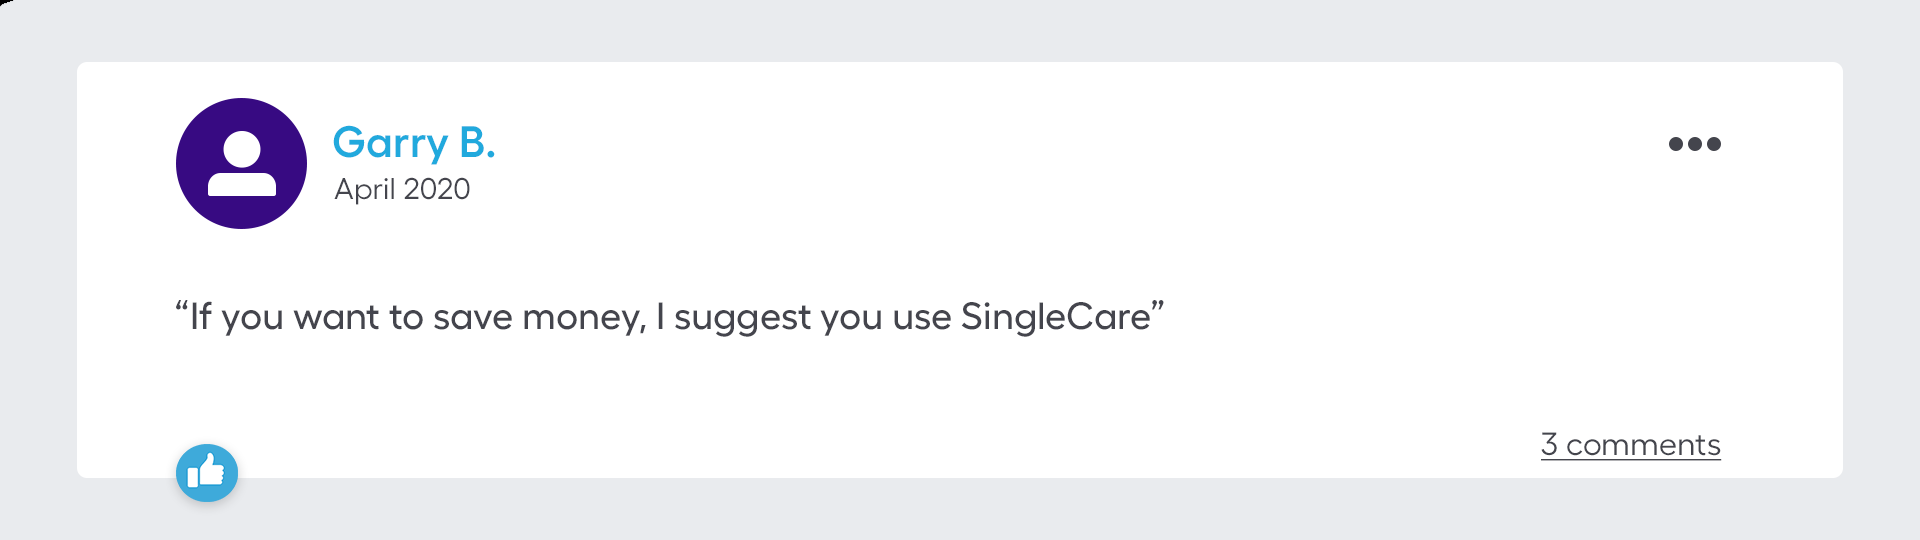 If you want to save money, I suggest you use SingleCare.